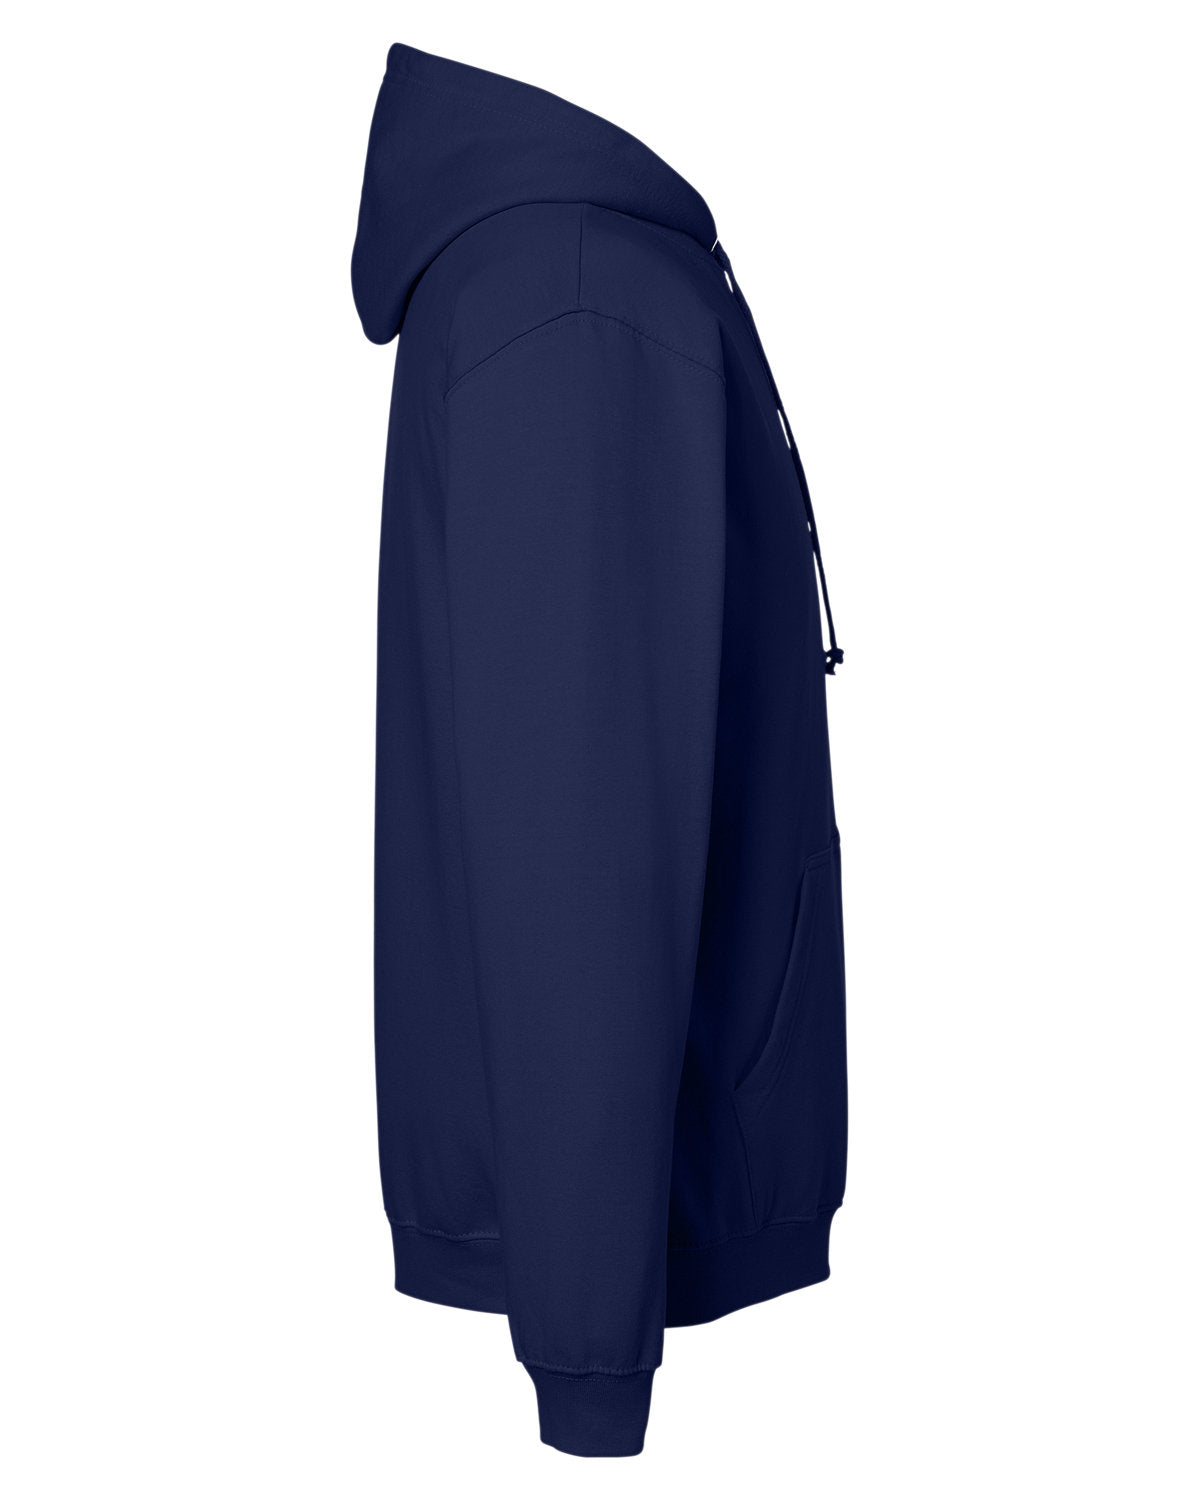 JHA001-Just Hoods By AWDis-OXFORD NAVY